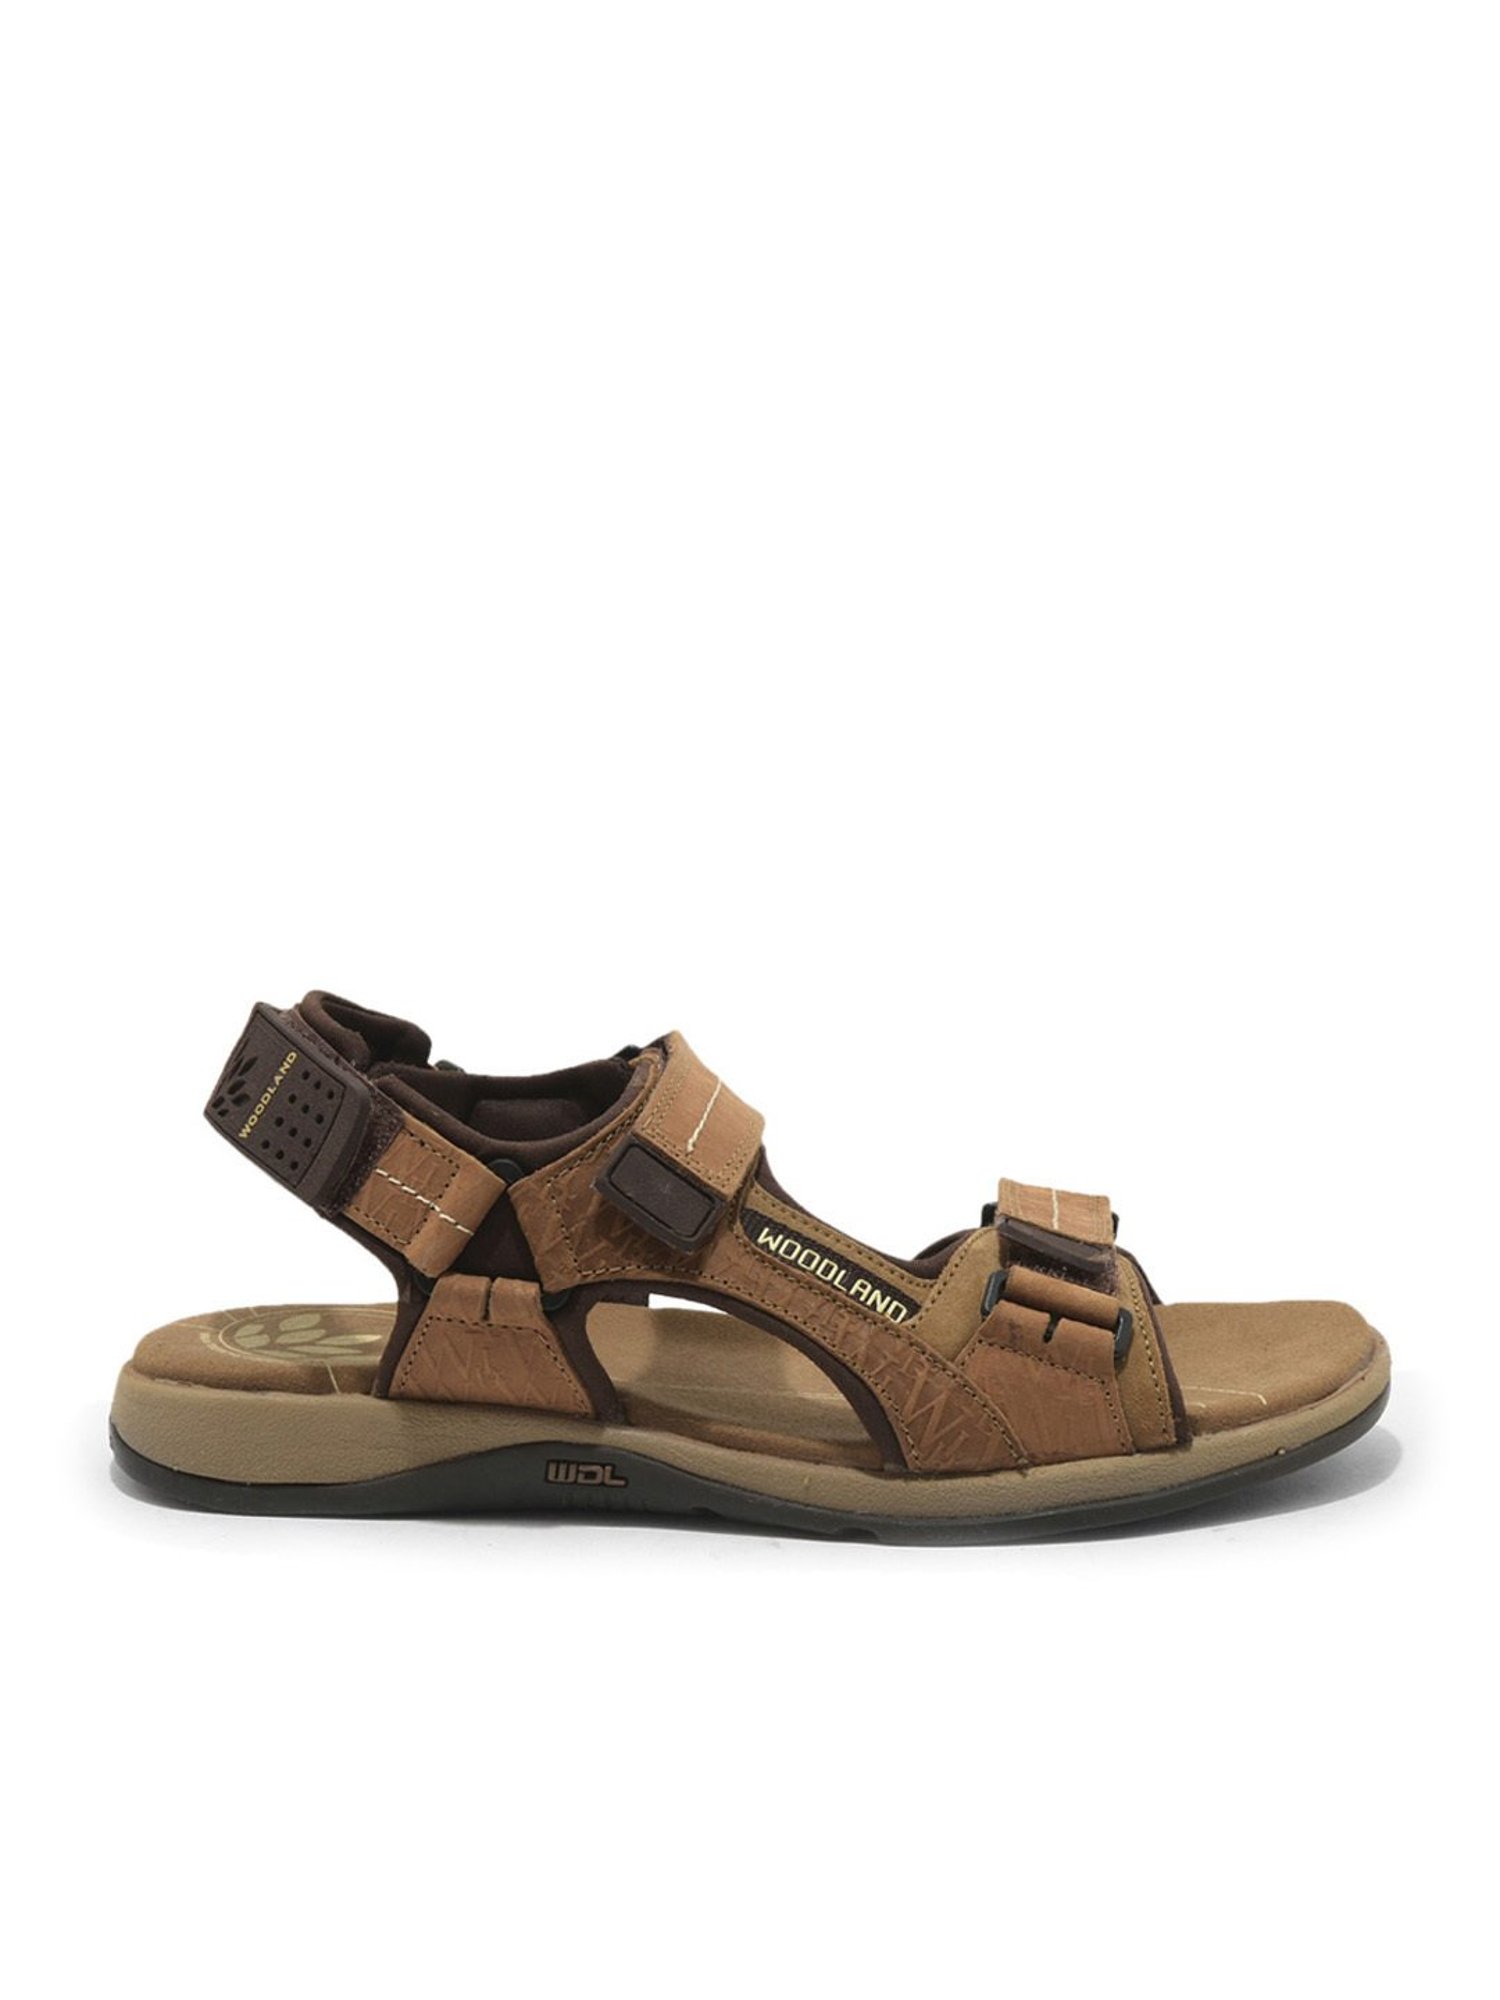 Buy WOODLAND Camel Mens Velcro Closure Casual Sandals | Shoppers Stop